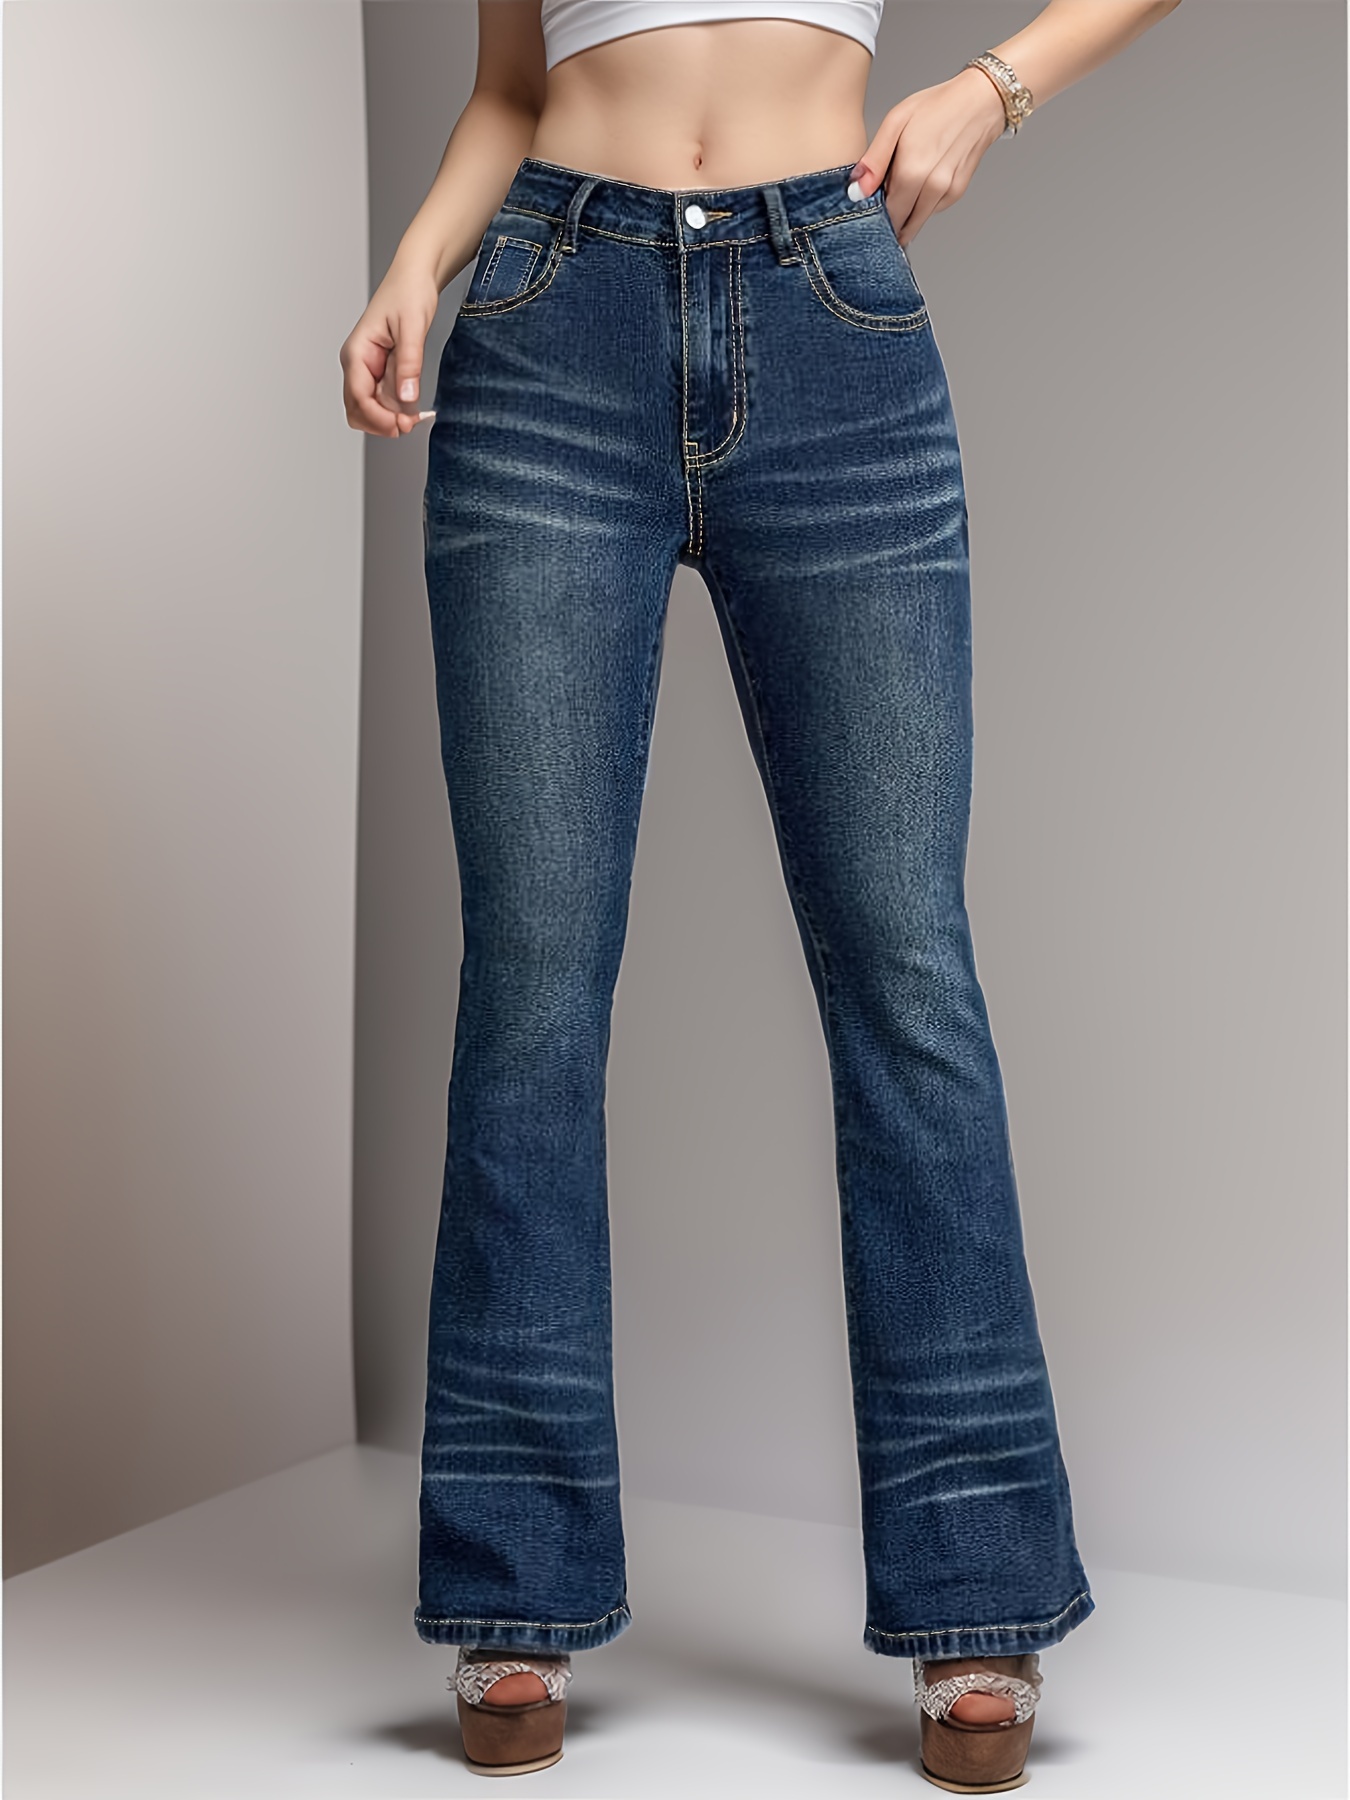 Women's Bum Lifting High Waisted Flared Jeans